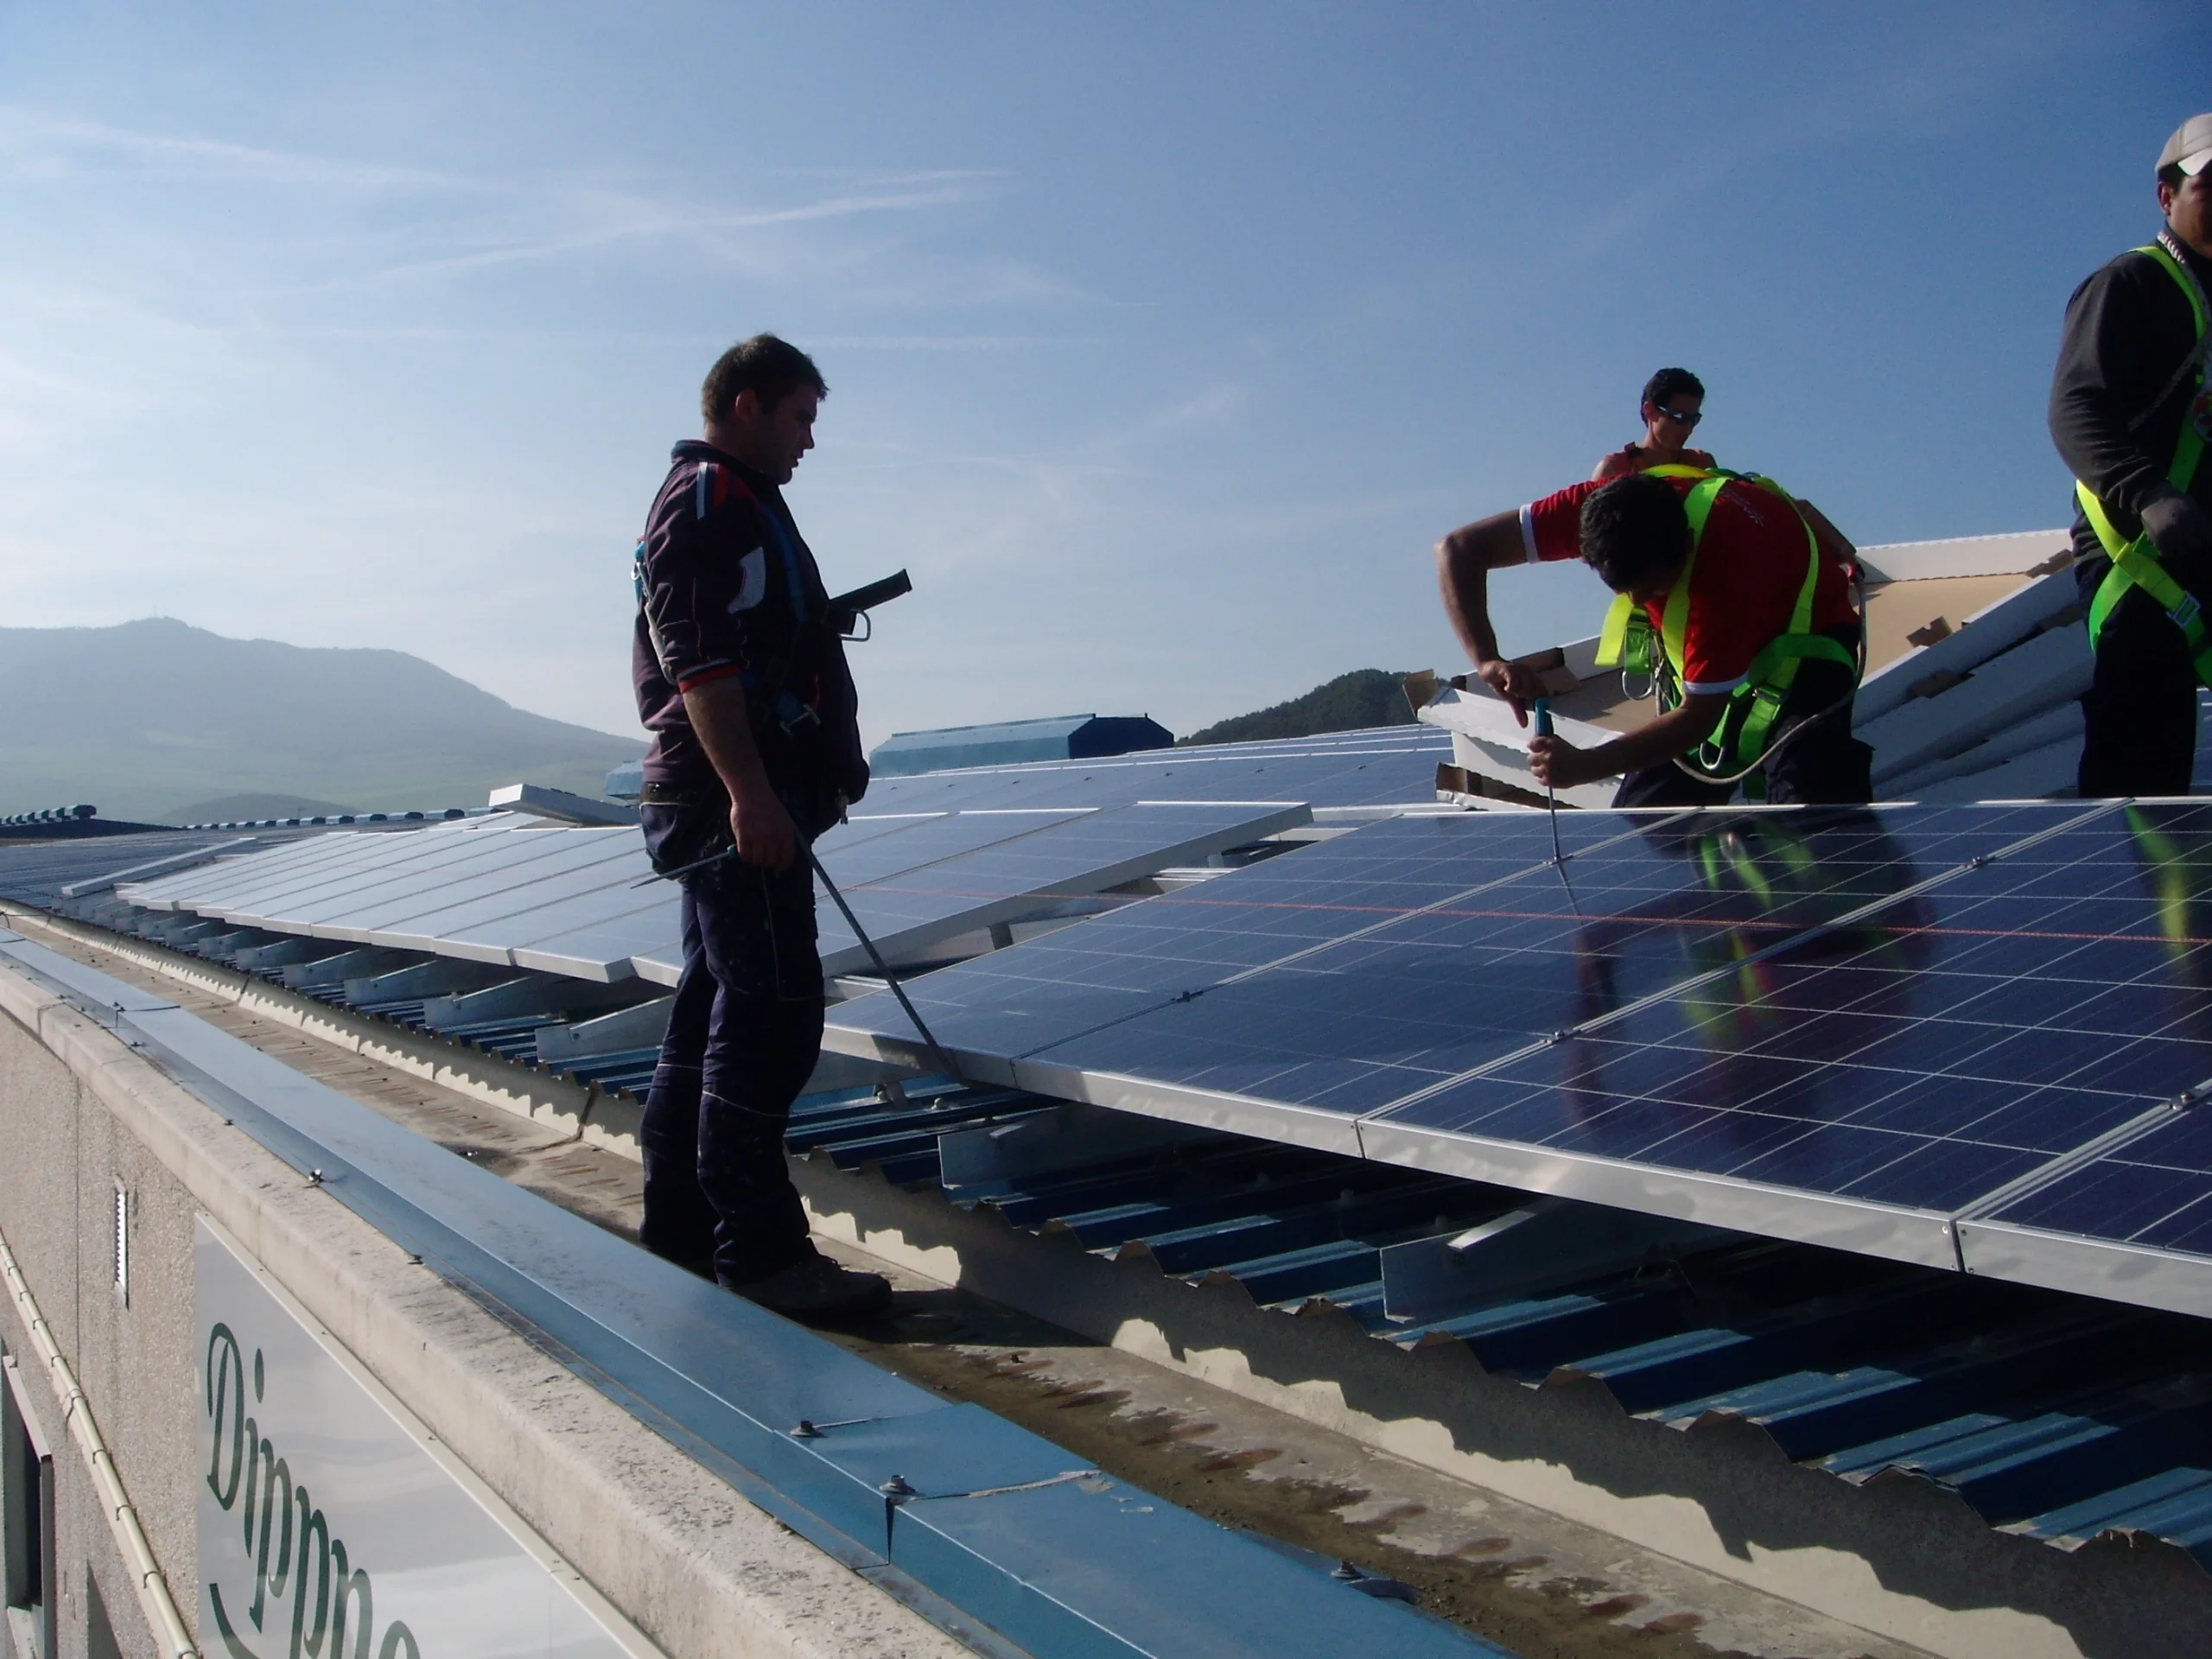 Workers in safety harnesses installing solar panels on a rooftop.
